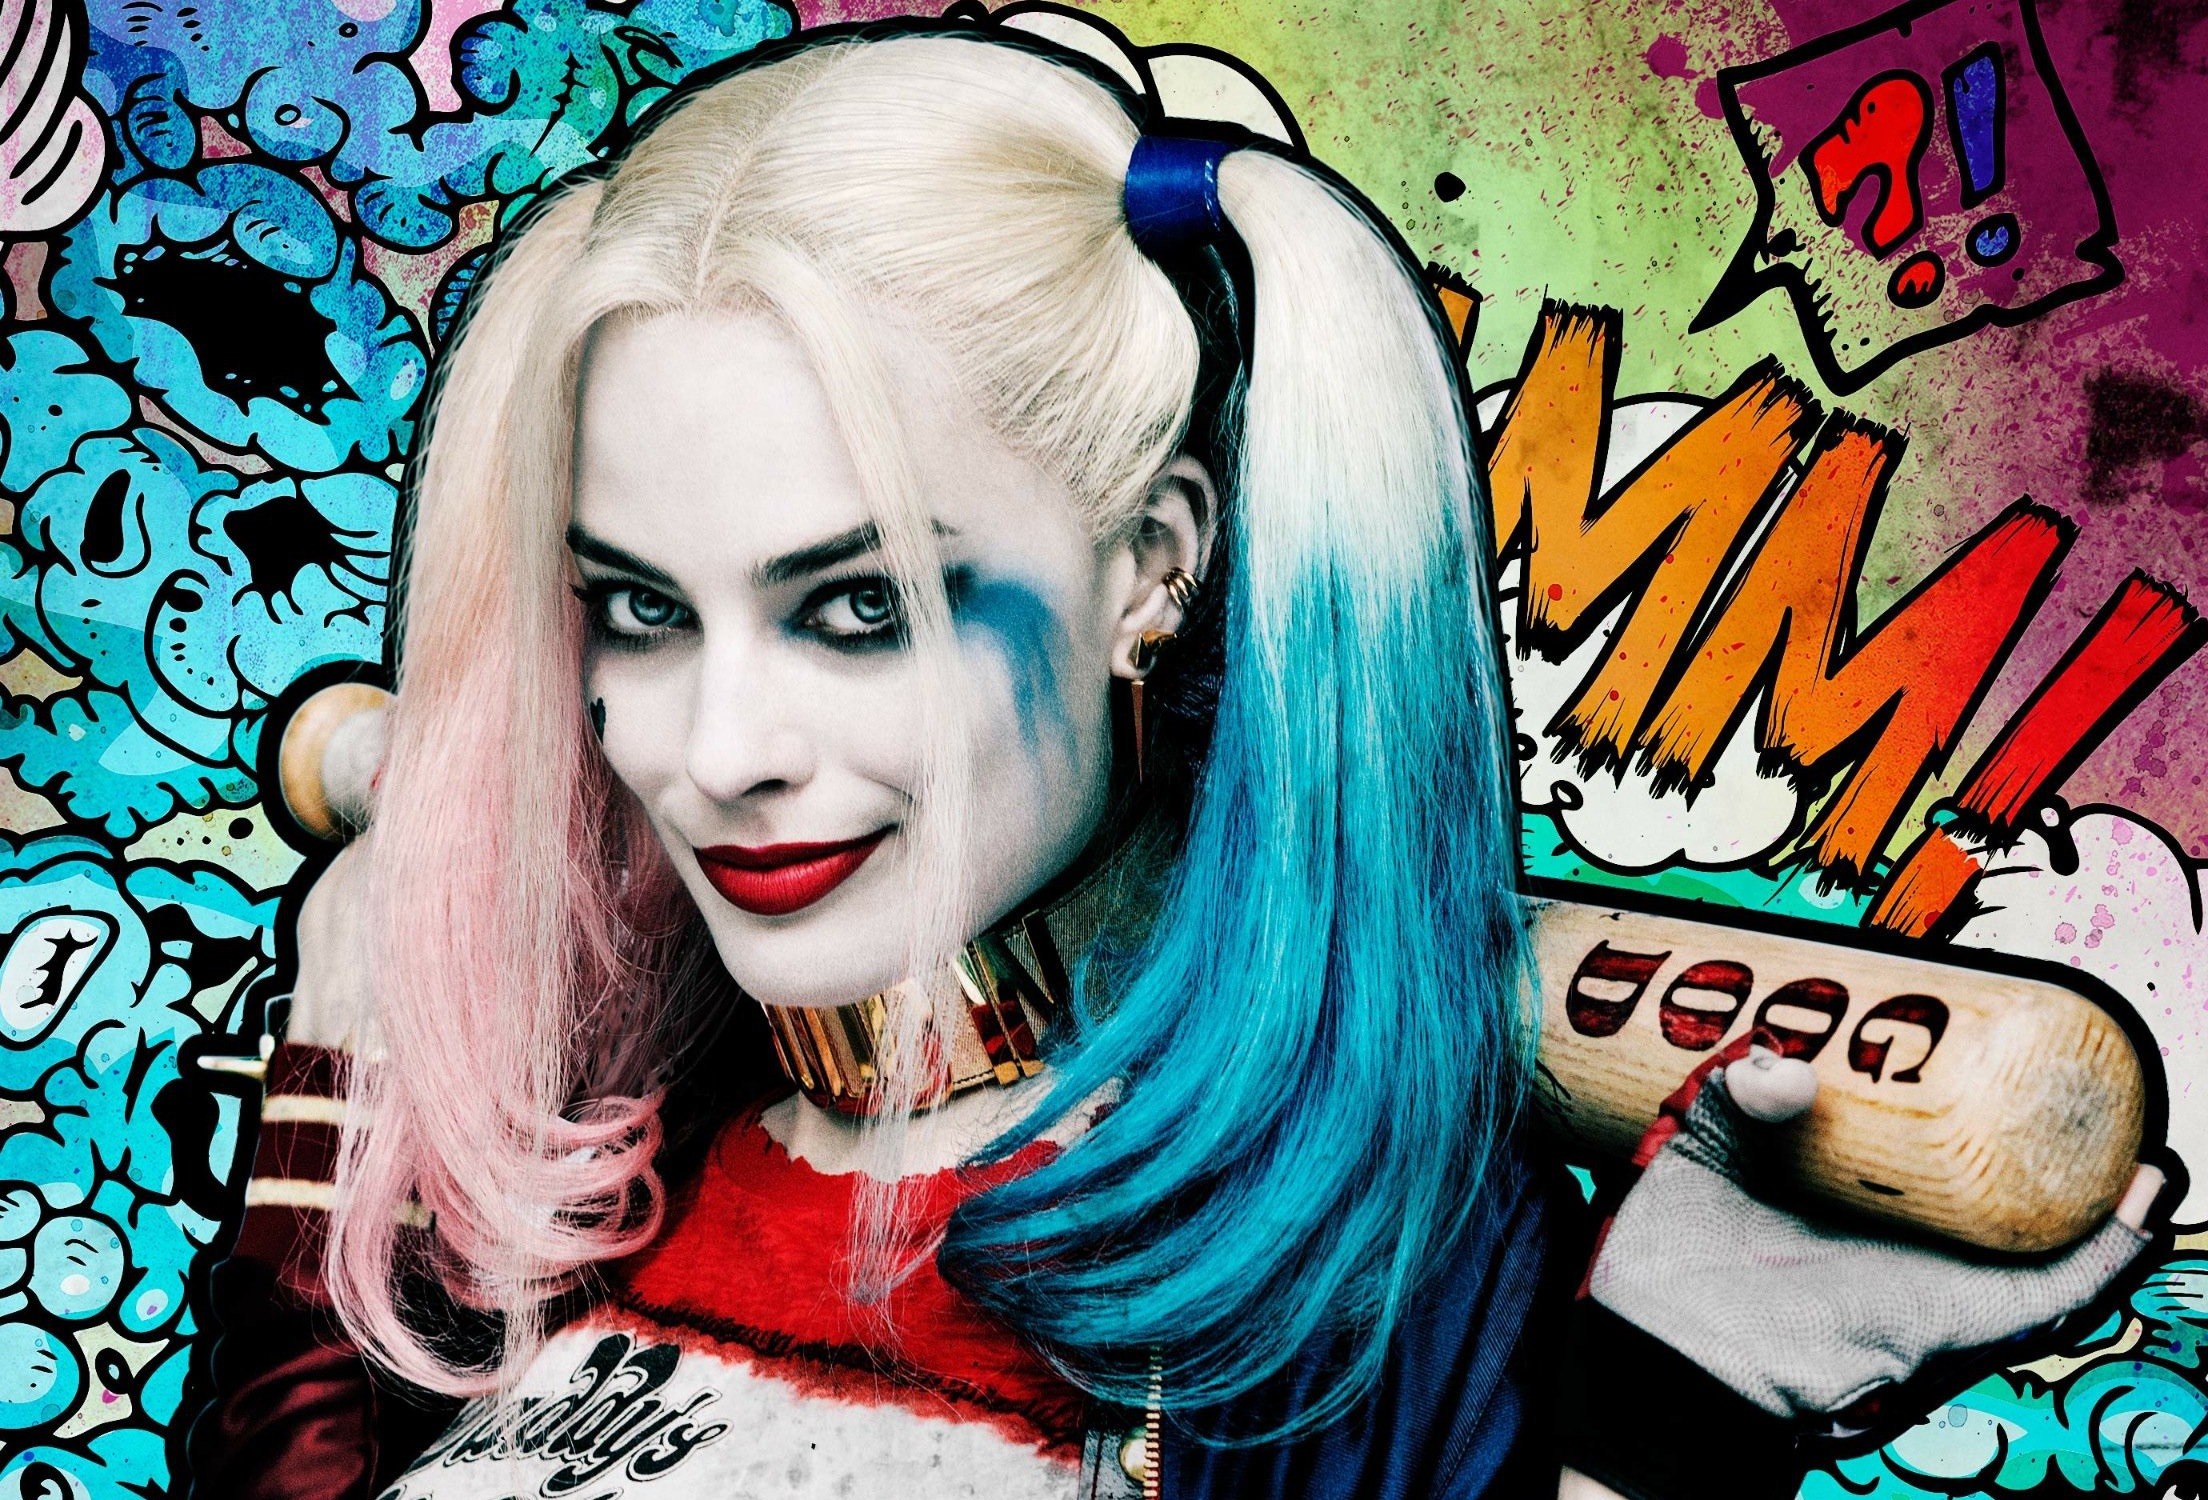 2208x1500 Harley Quinn Suicide Squad Wallpapers 1257,7 Kbyte 13/07/2018